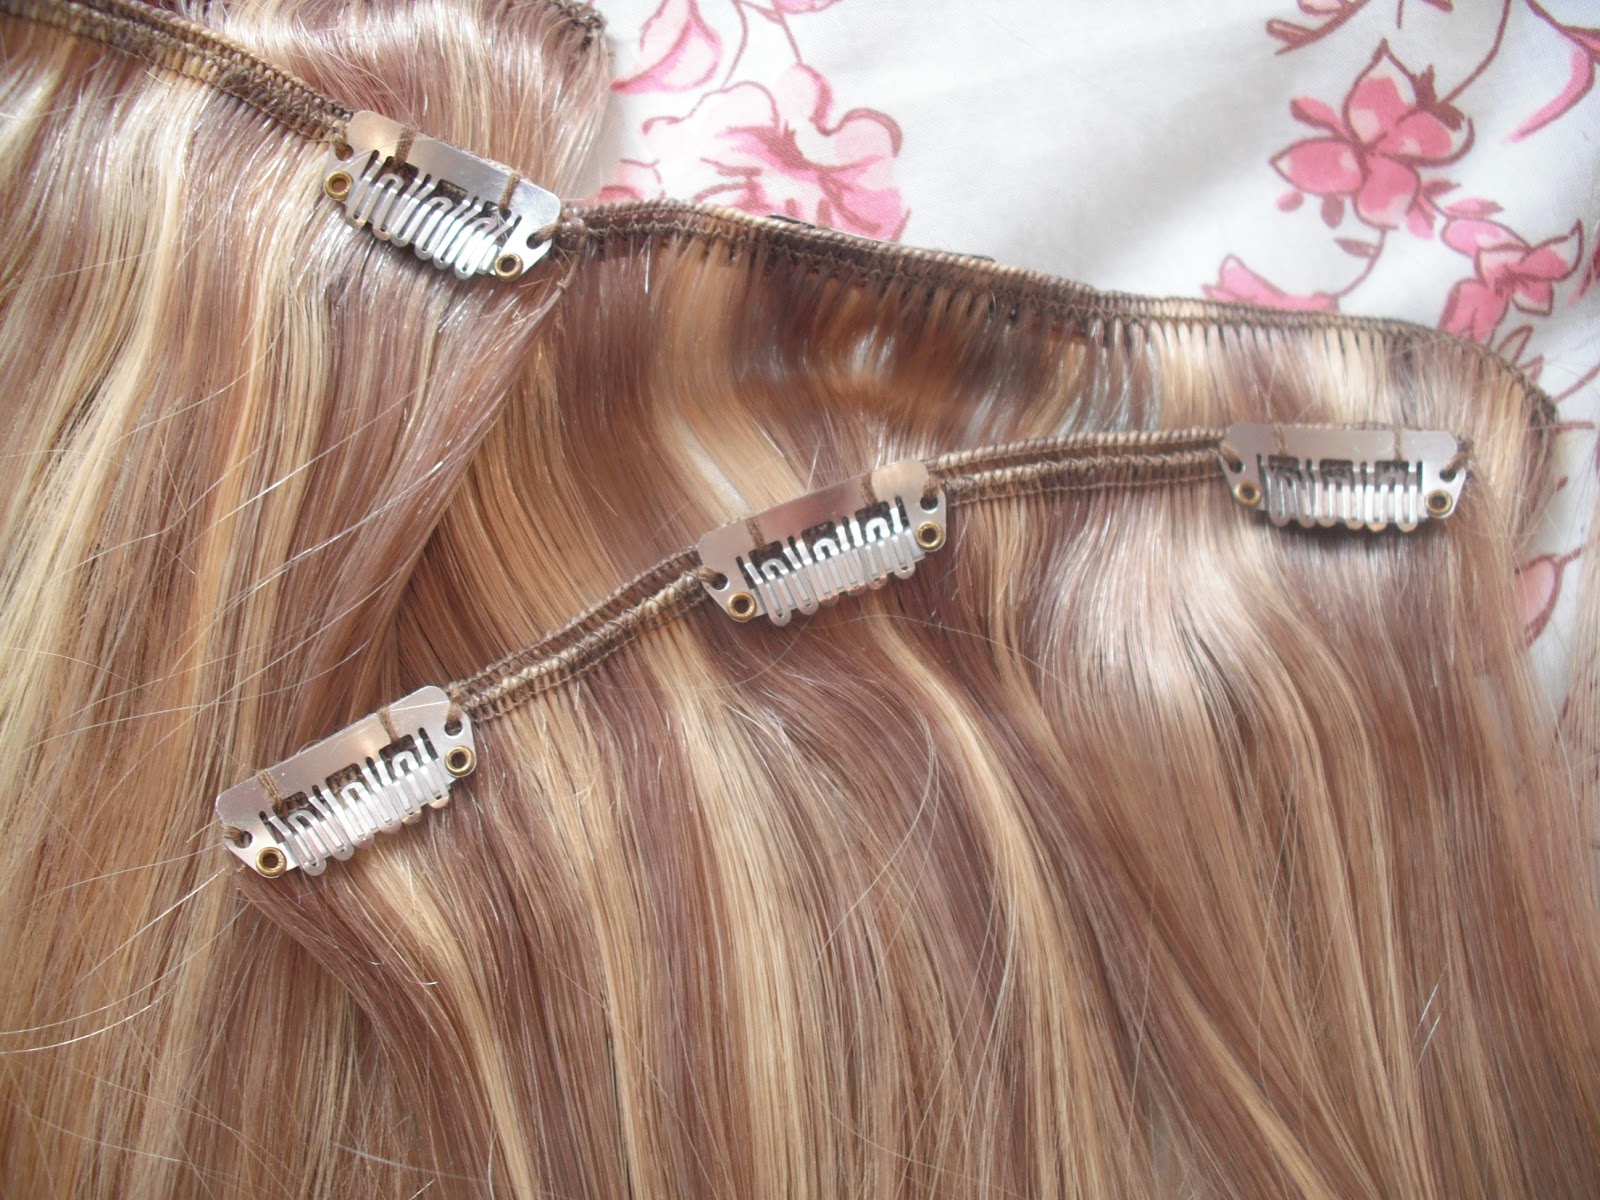 Electric Blue Real Hair Extensions - Clip In Hair Extensions - wide 5